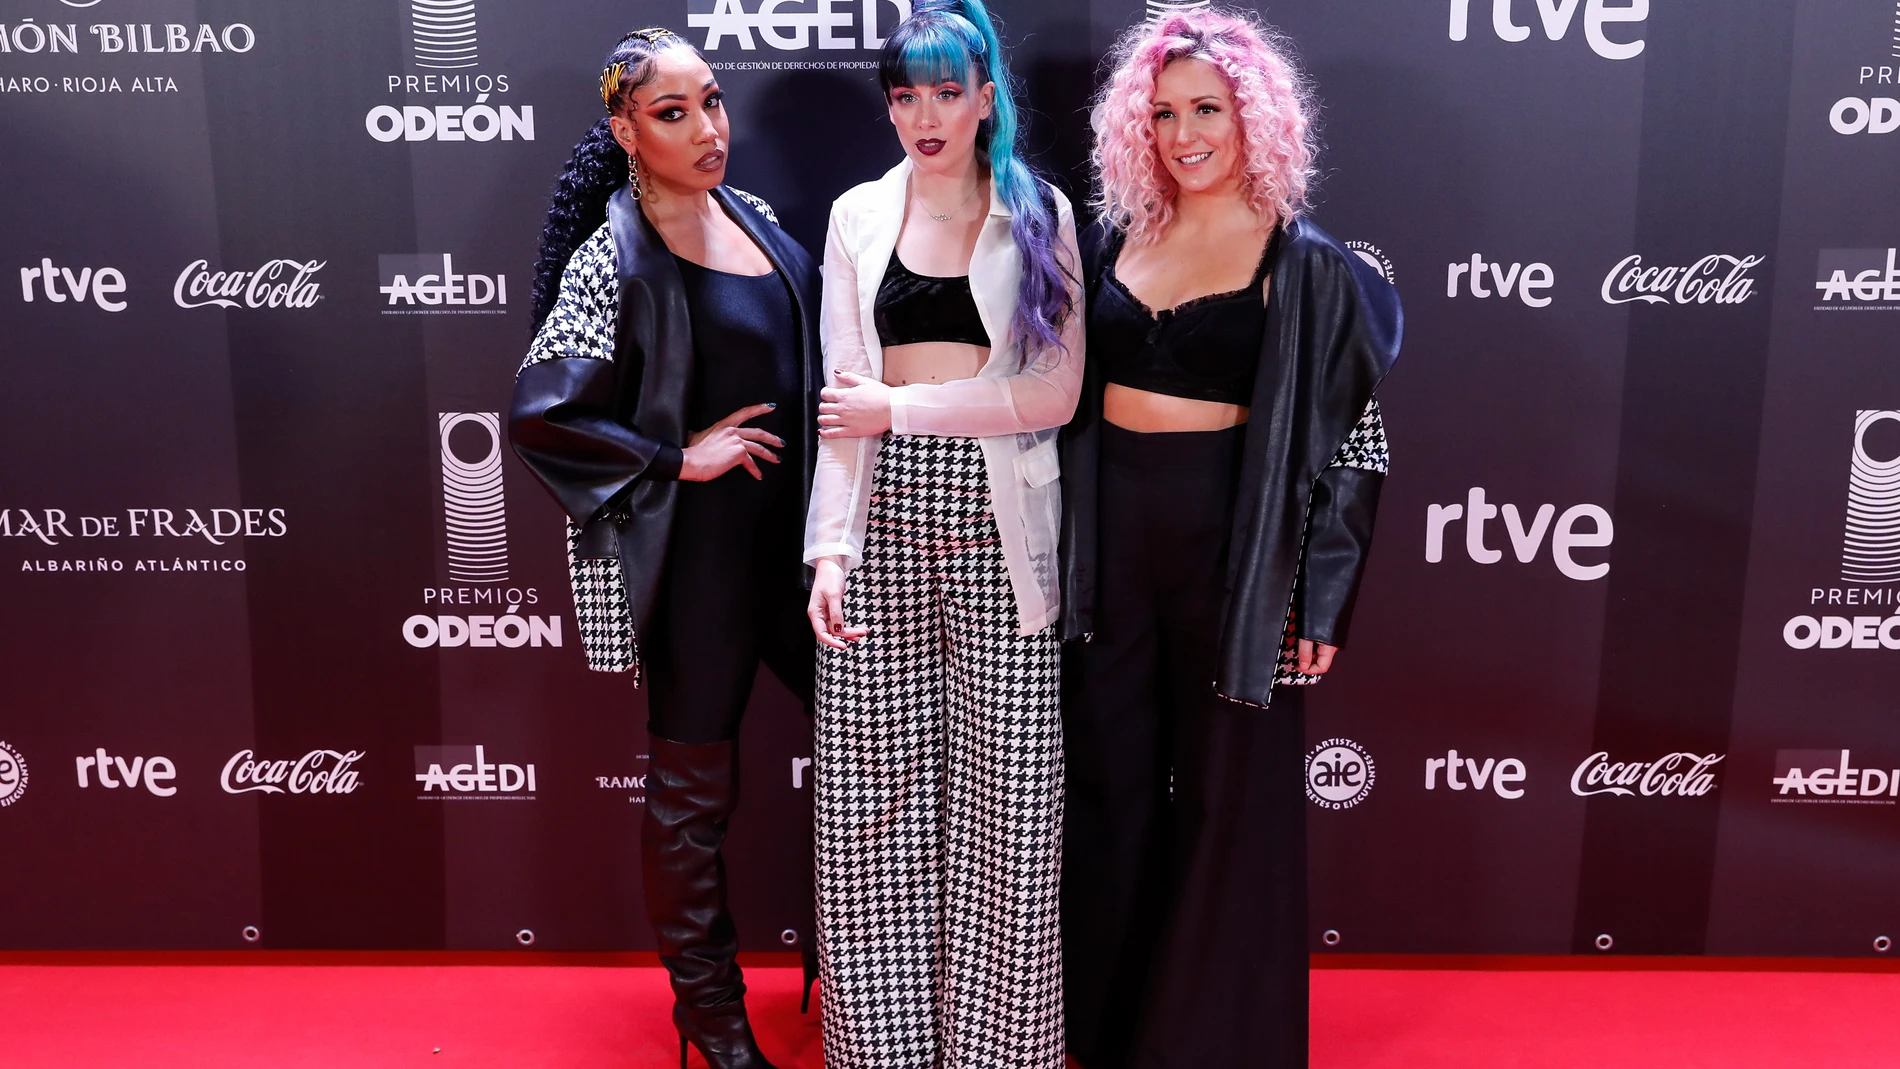 Group Sweet California Sonia Gómez, Alba Reig y Tamara Nsue at photocall for Odeon awards in Madrid on Monday, 20 January 2020.